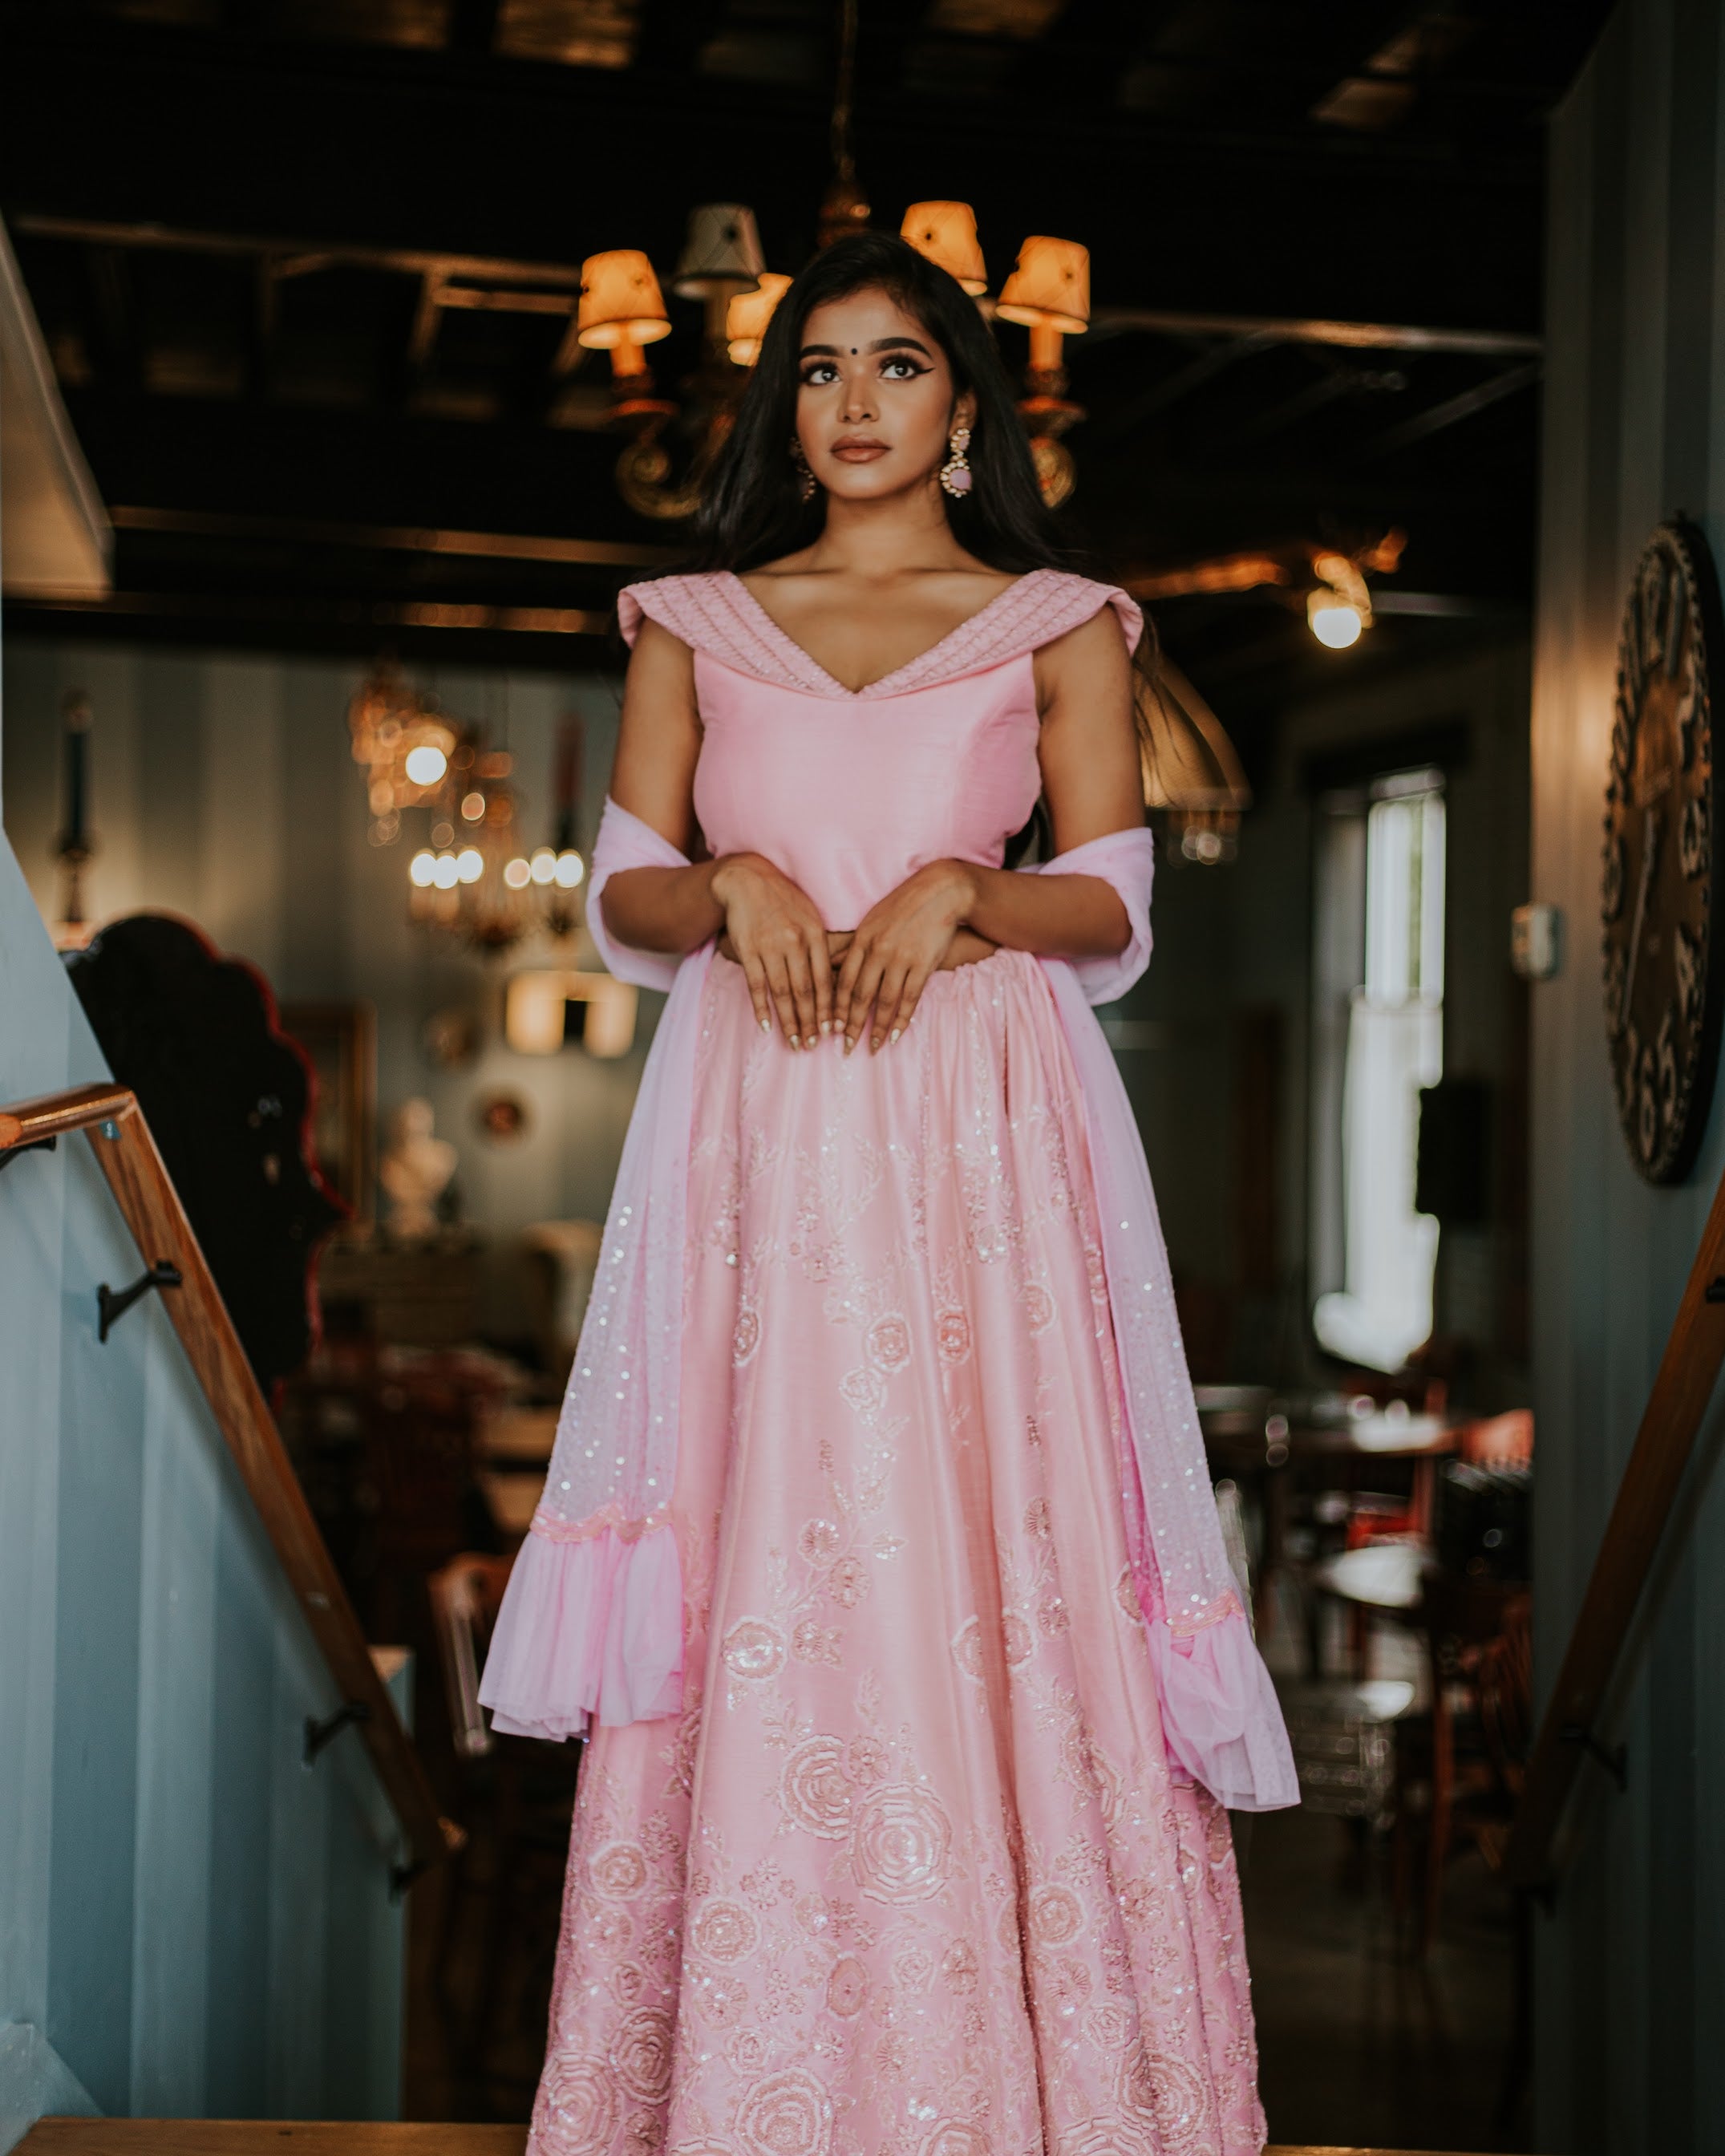 Made-To-Measure Sassy Indo Western Style Lehenga Choli in Rose Pink. Skirt Embellished With Silk Resham And Intricate Sequins Beading on Floral Motifs - By Top Indian Designer Sushma Patel